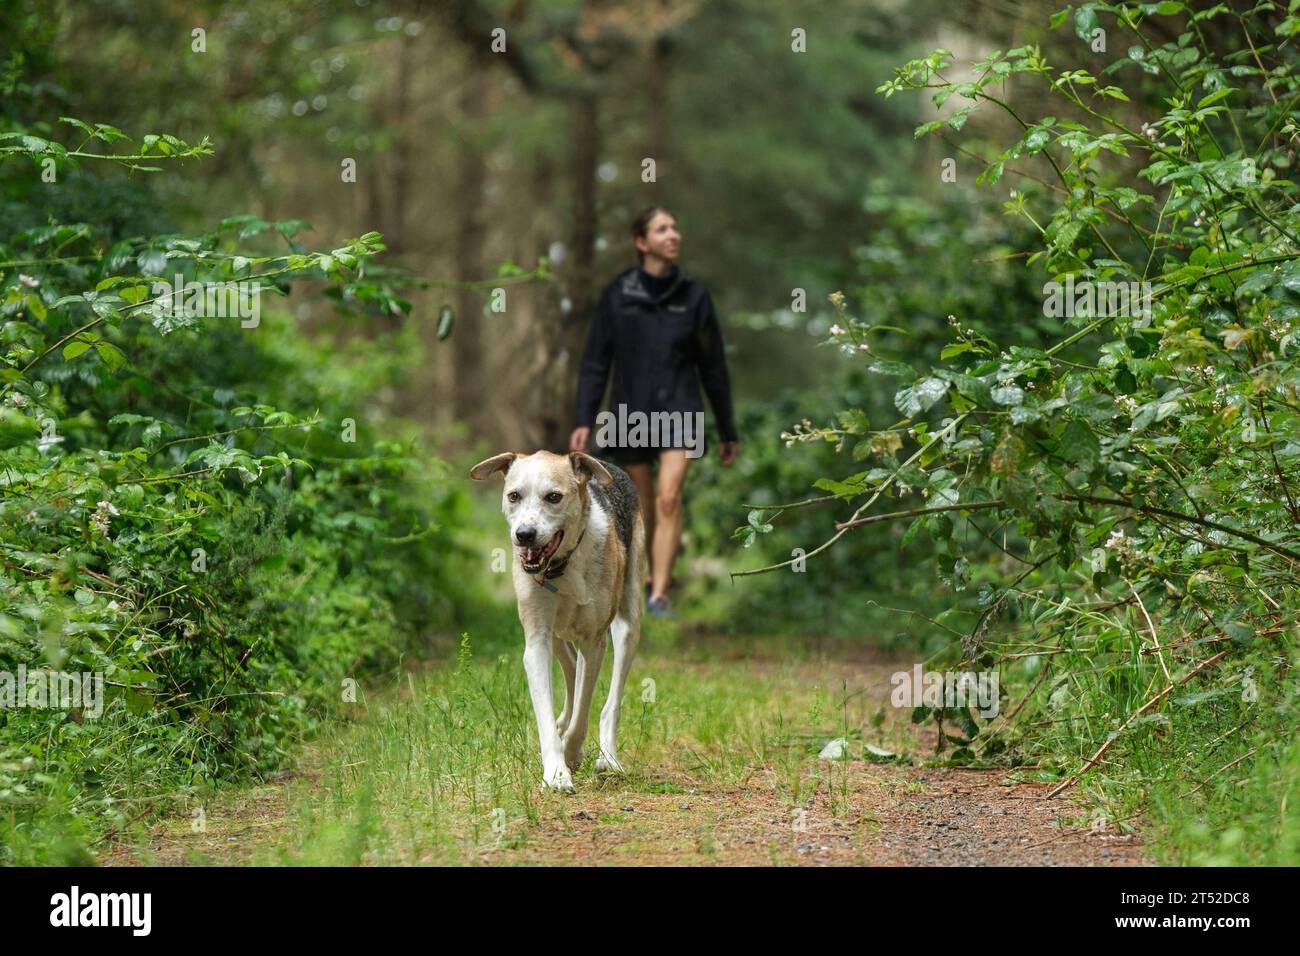 Woman in a forest taking a huntaway dog for a walk Stock Photo